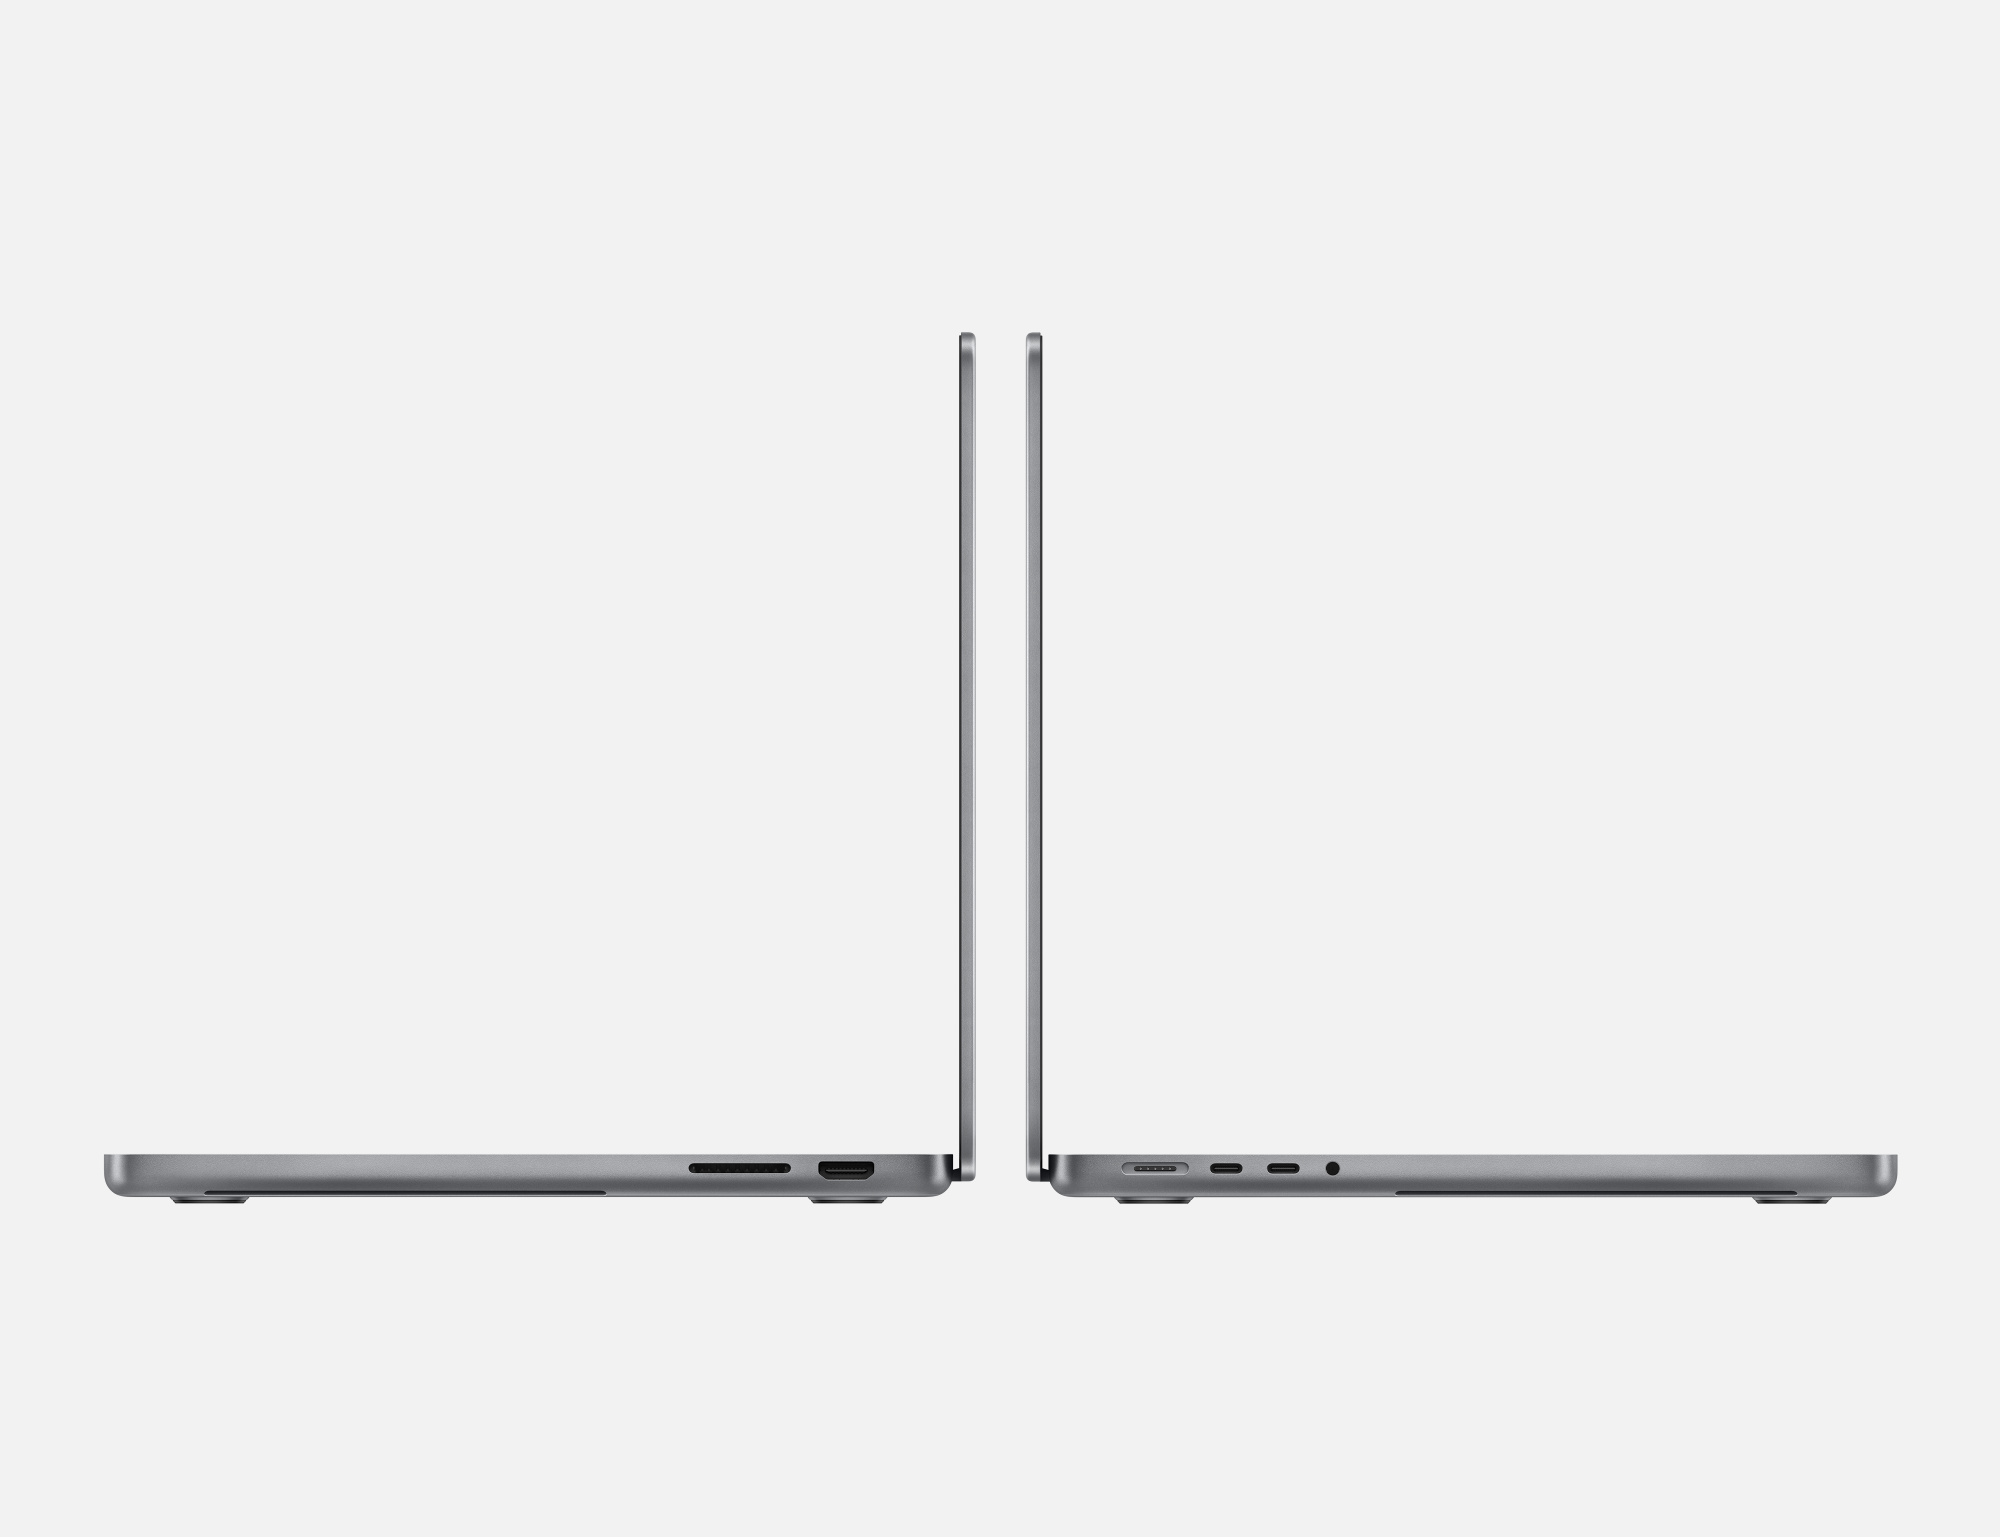 mbp14-spacegray-gallery3-202310